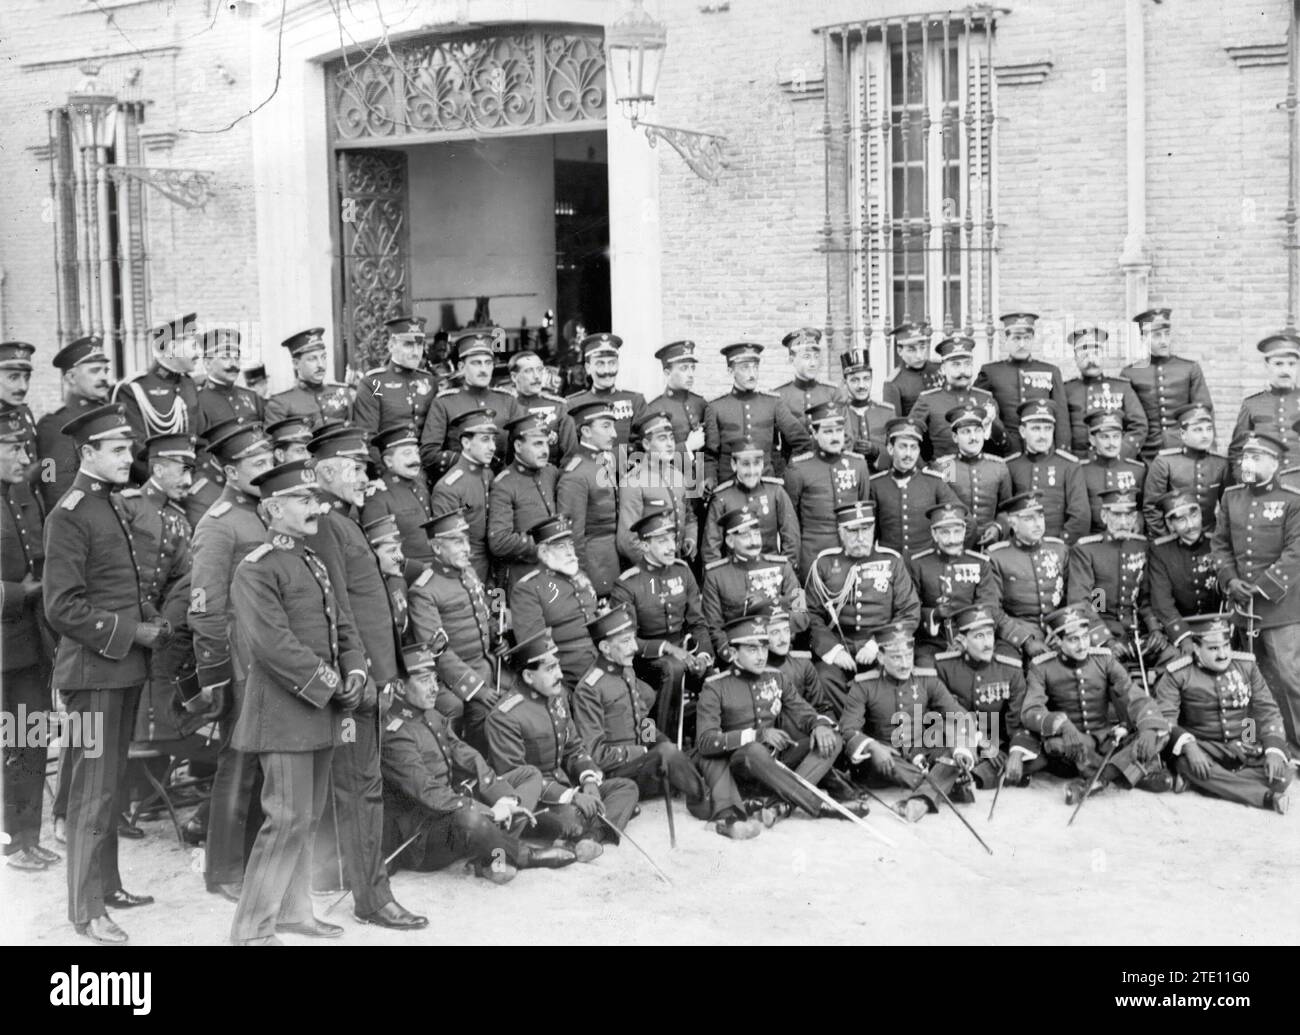 12/31/1915. The King in the María Cristina barracks. D. Alfonso Xii (1), Infante D. Alfonso (2) and the Captain General (3), with the officers of the King's regiment, after the lunch that celebrated the return from Africa of the first battalion. Credit: Album / Archivo ABC / Ramón Alba Stock Photo